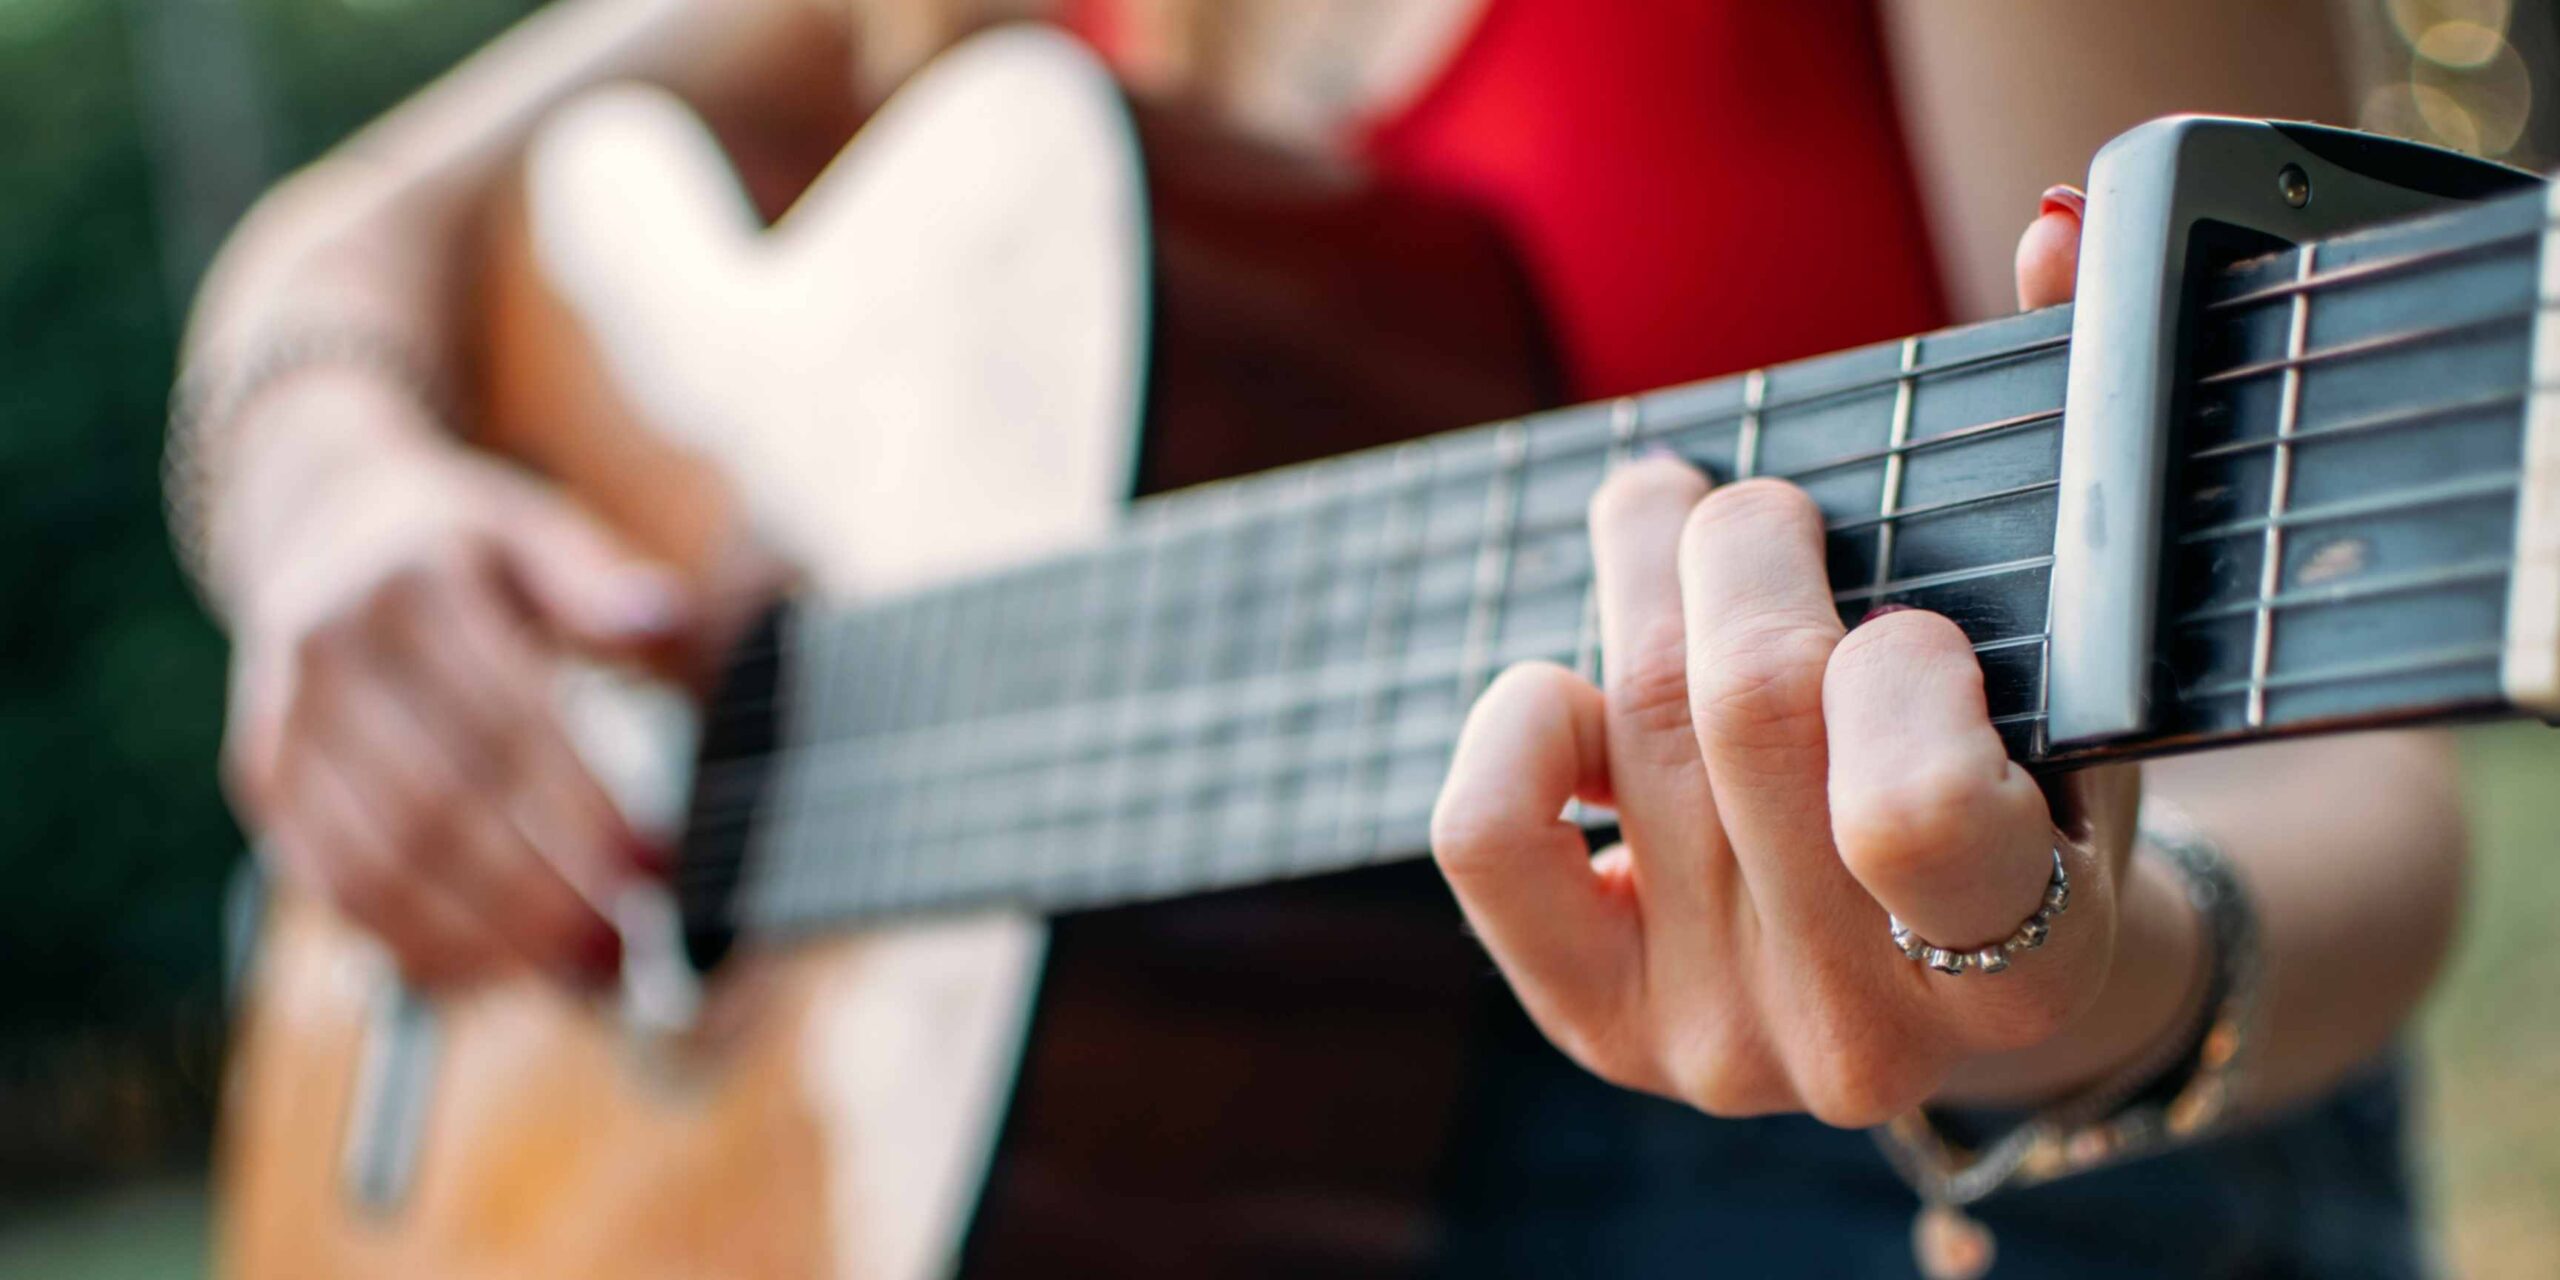 Guitar Lessons | Music Lessons for Adults in Sacramento